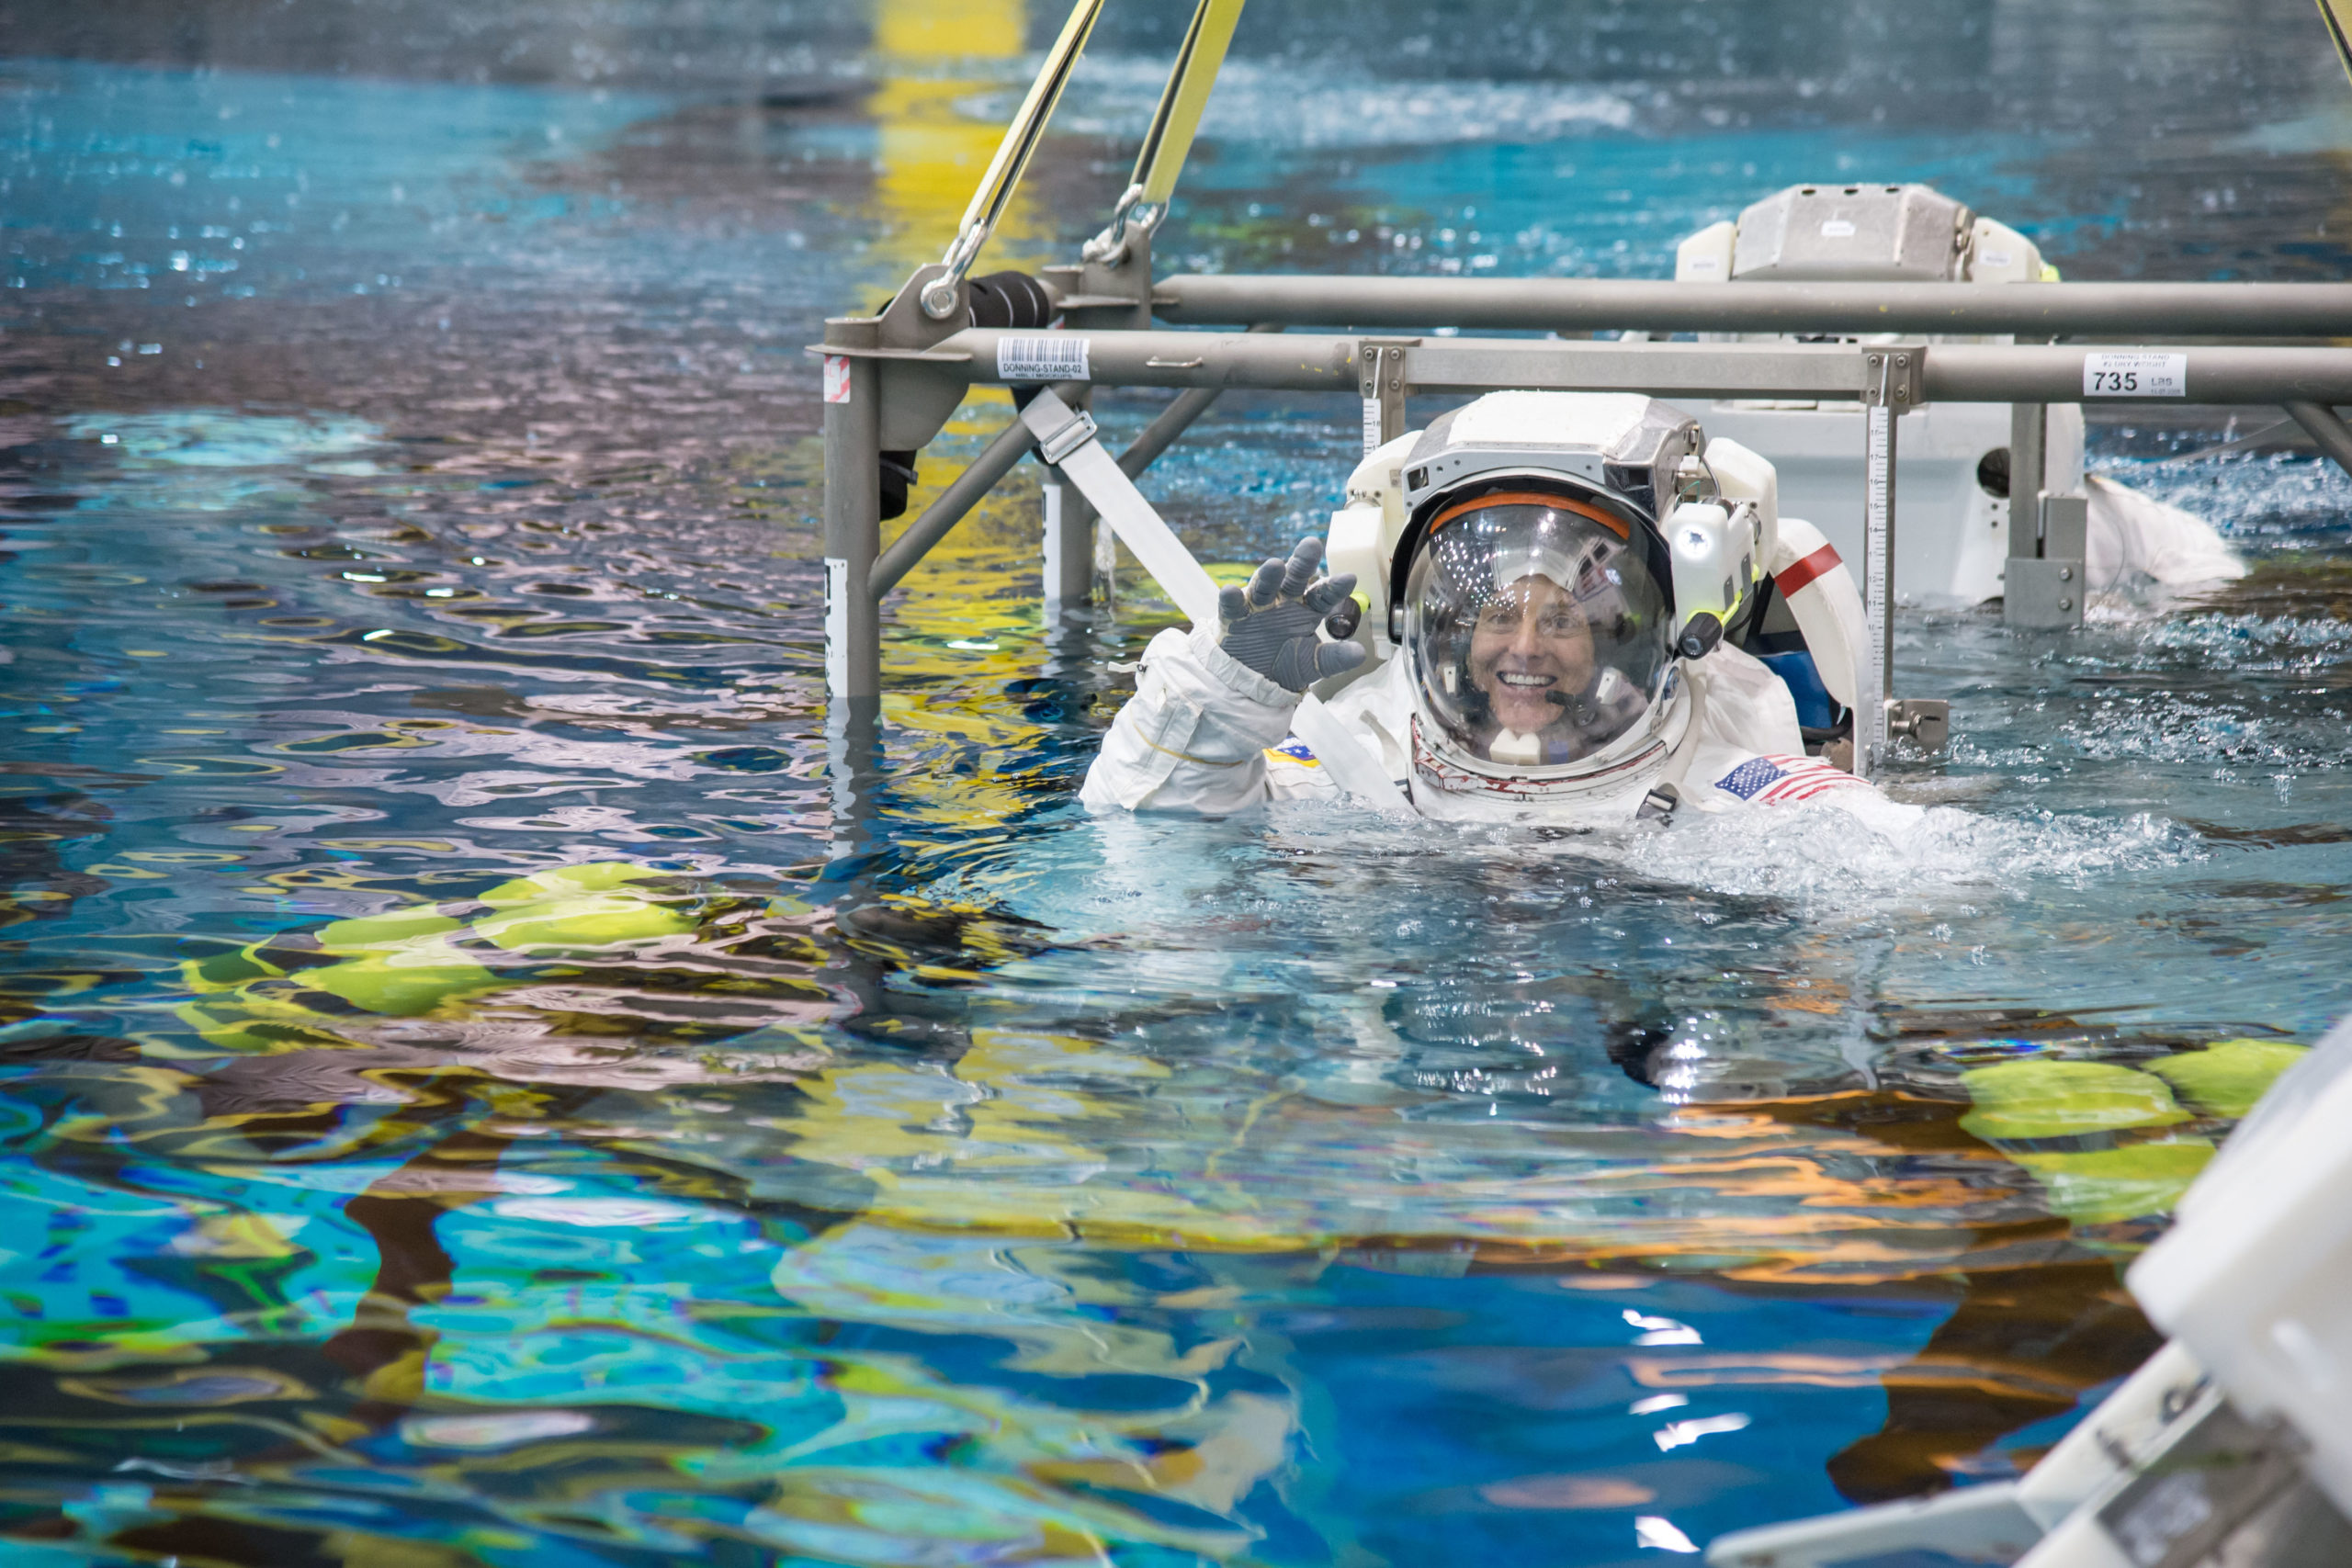 NASA astronaut Nicole Mann lowered into the Neutral Buoyancy Laboratory during a spacewalk training session. 